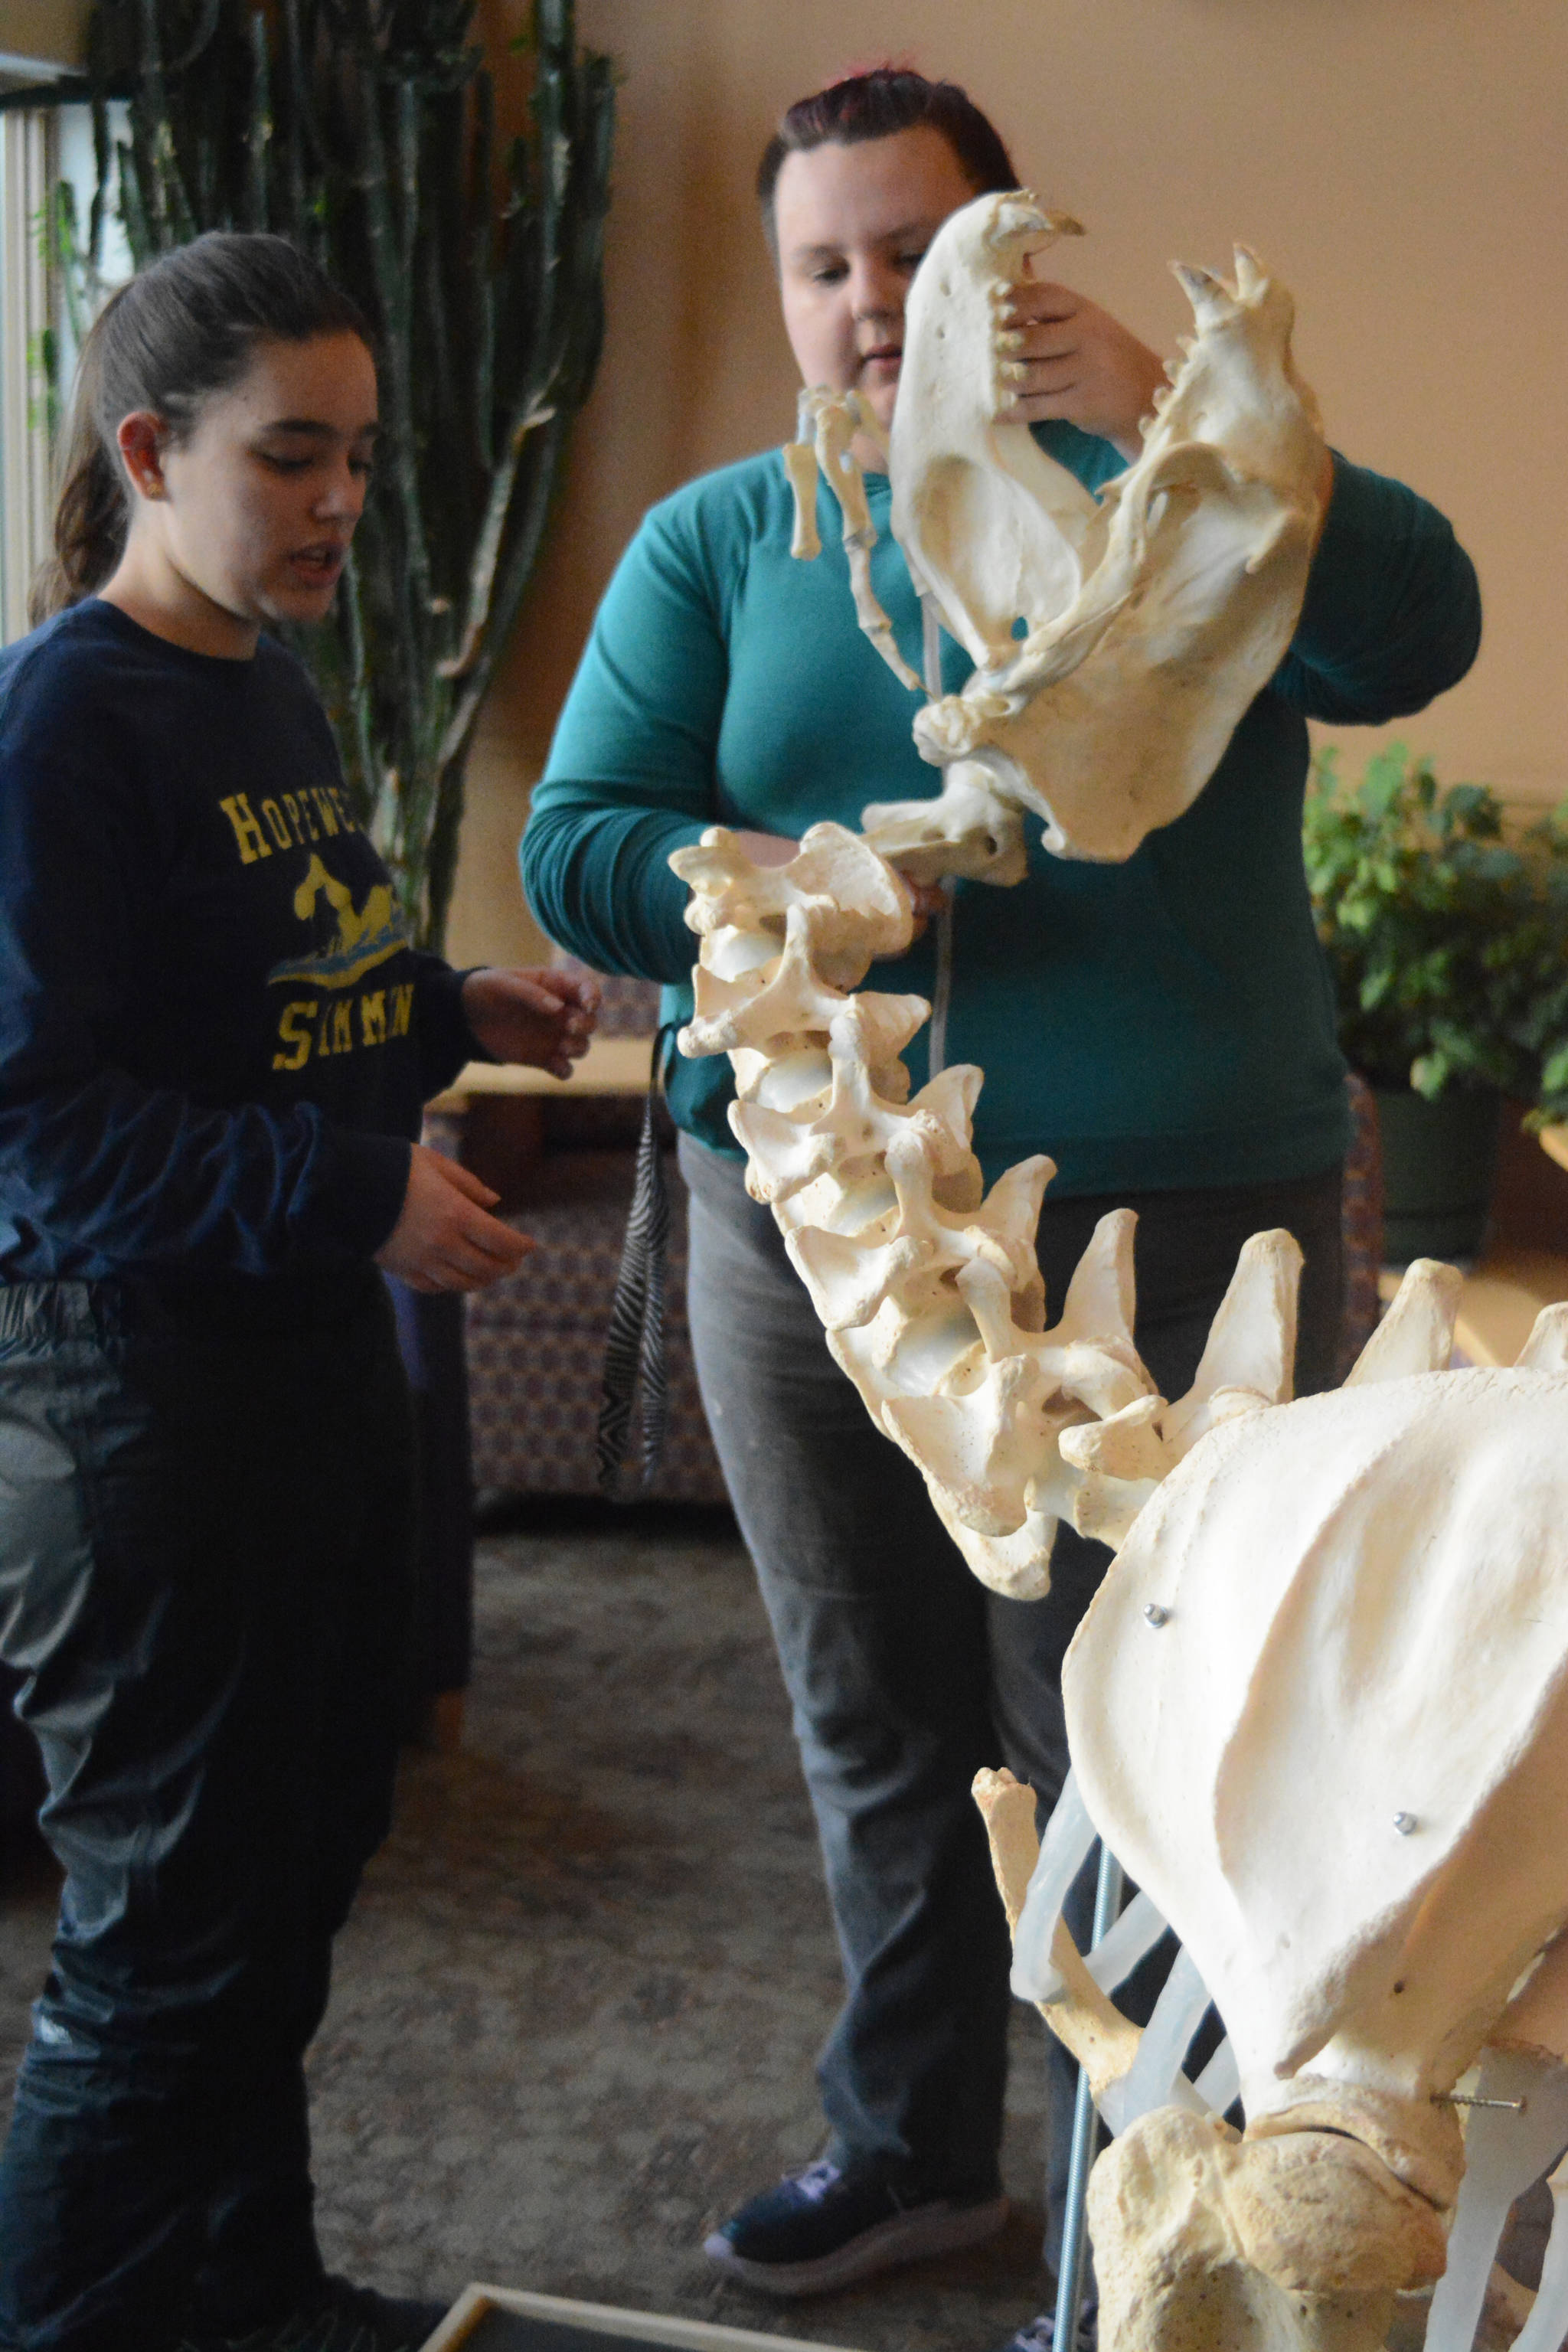 Zobeida Rutkin, right, helps Nicole Webster, left, put the skull of Woody on the rest of his skeleton Wednesday, Nov. 22, 2017 in Pioneer Hall of Kachemak Bay Campus in Homer, Alaska. The sea lion lived at the Alaska SeaLife Center before dying in November 2015 at the age of 22. The students helped articulate Woody’s skeleton in Lee Post’s Marine Skeleton Articulation class. (Photo by Michael Armstrong, Homer News)